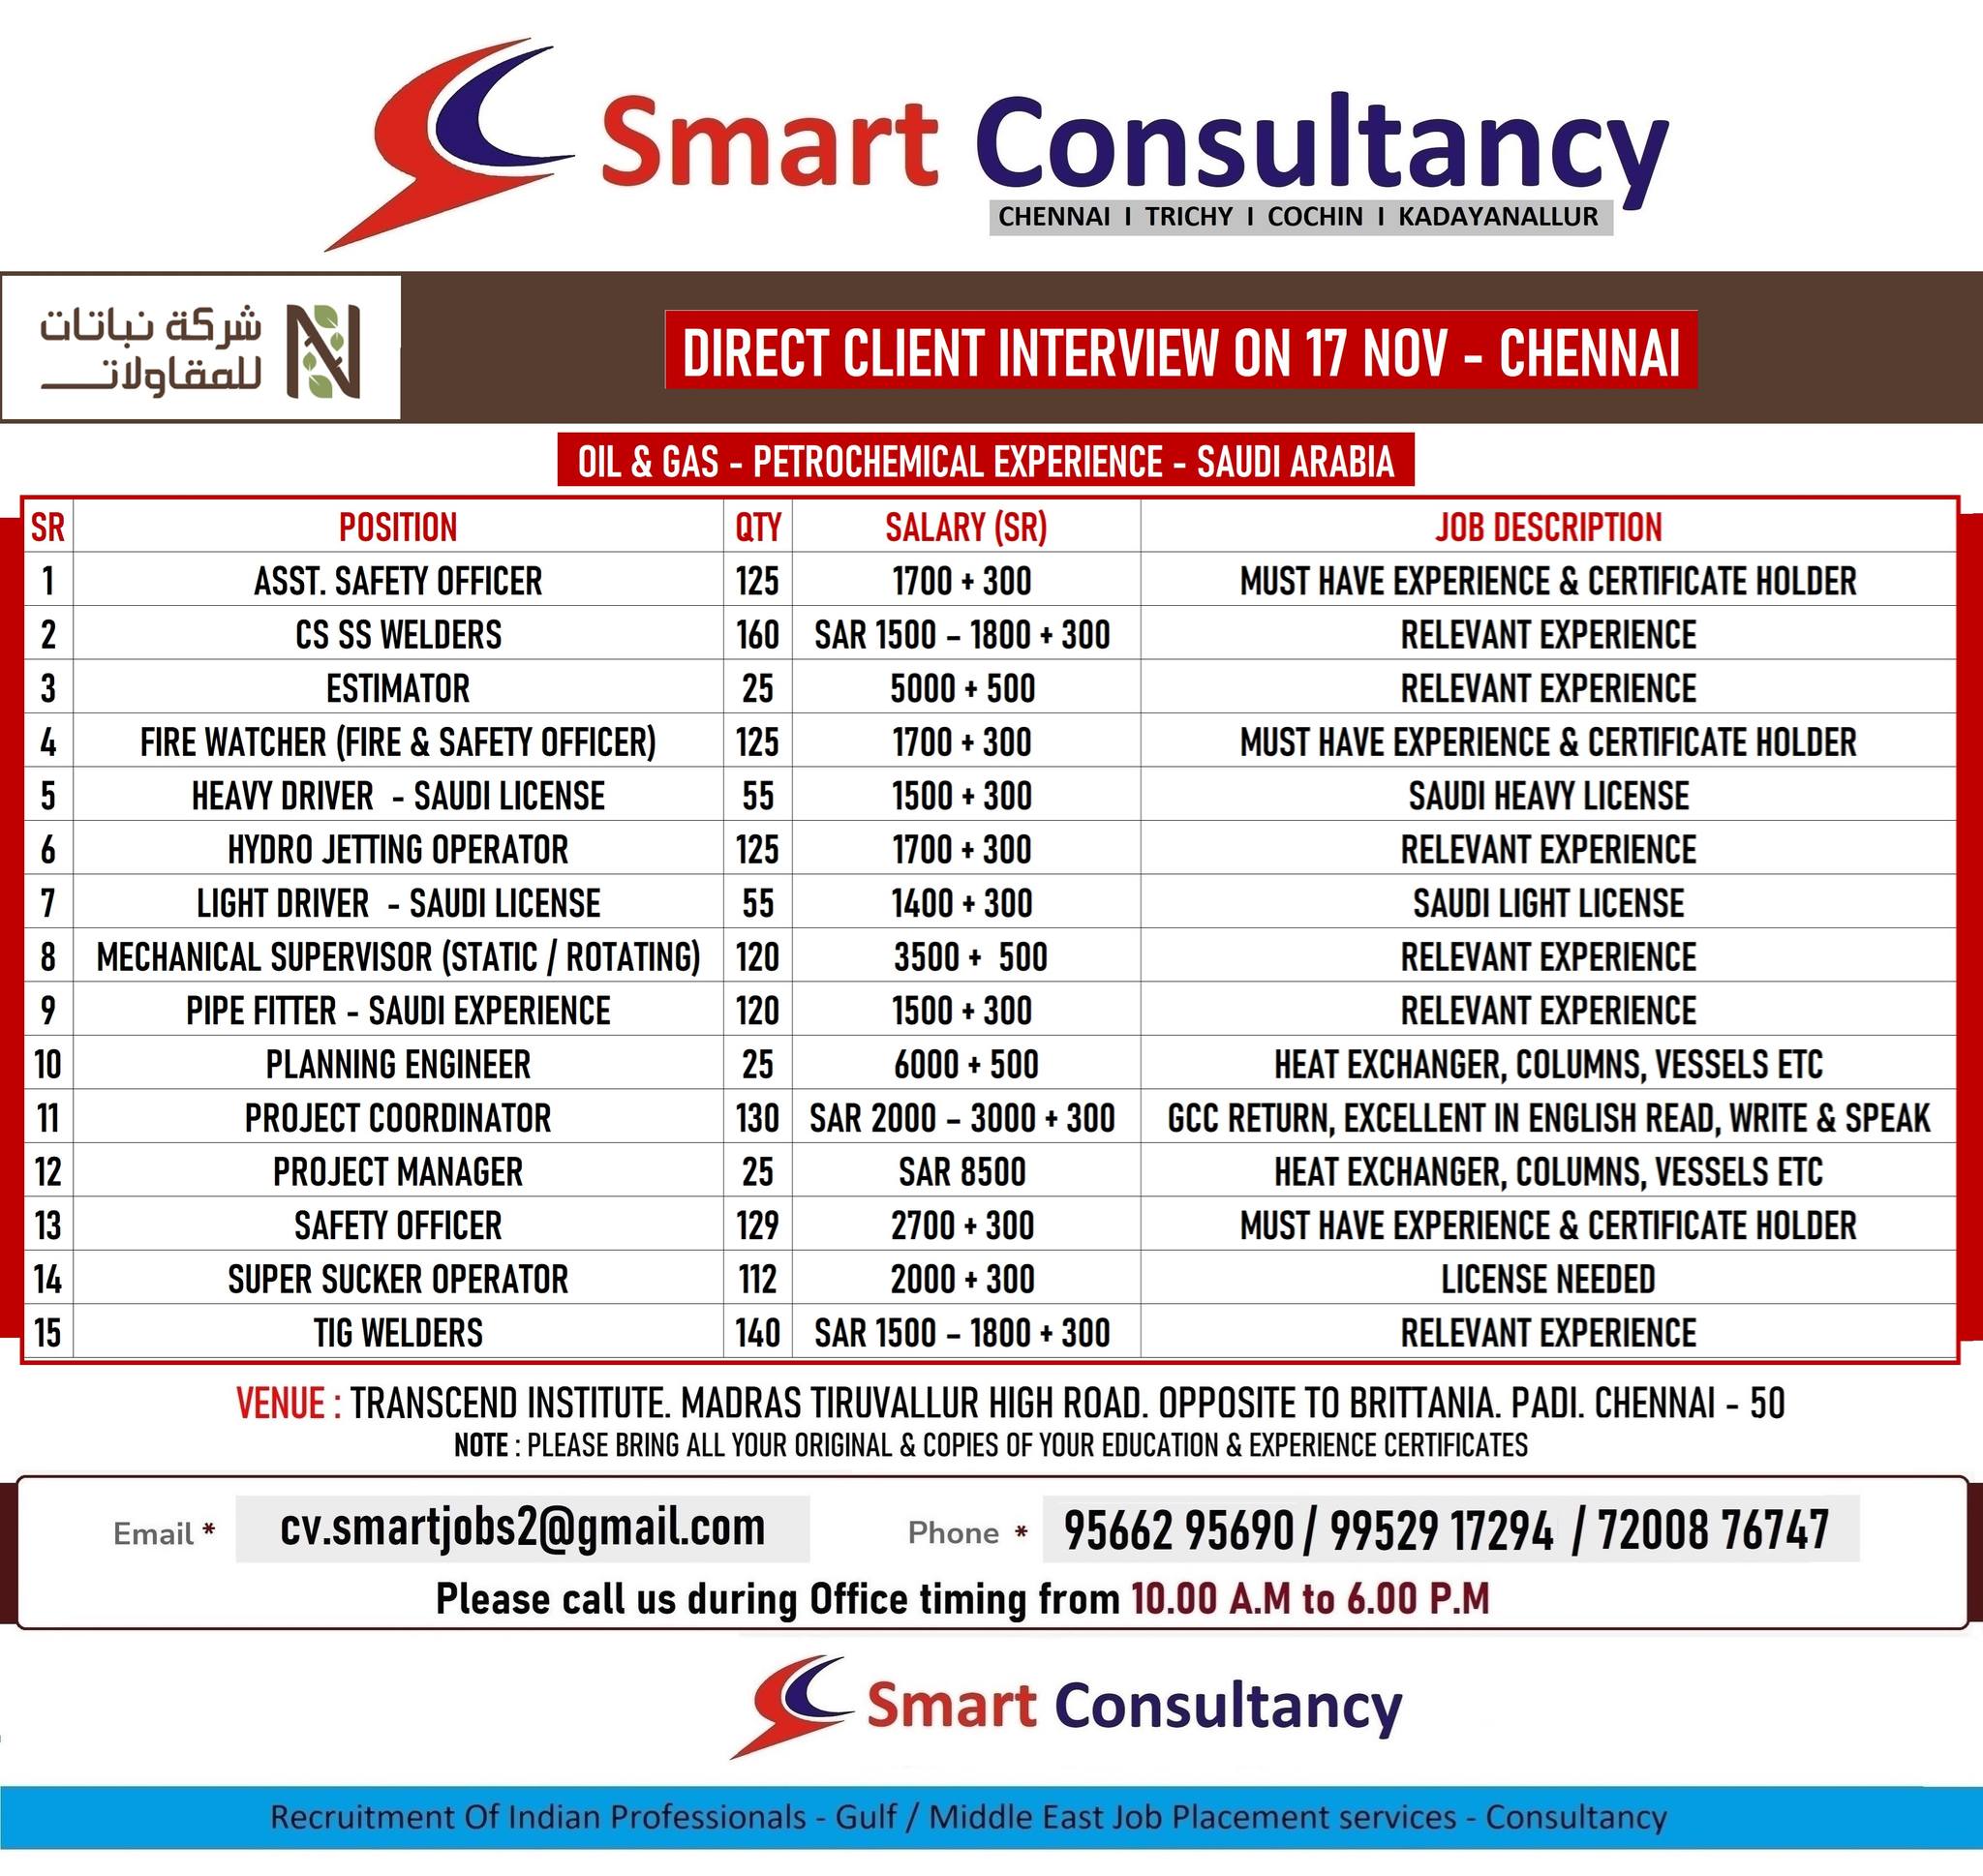 WANTED FOR NABADAT - SAUDI  DIRECT CLIENT INTERVIEW ON 17 NOV - CHENNAI 